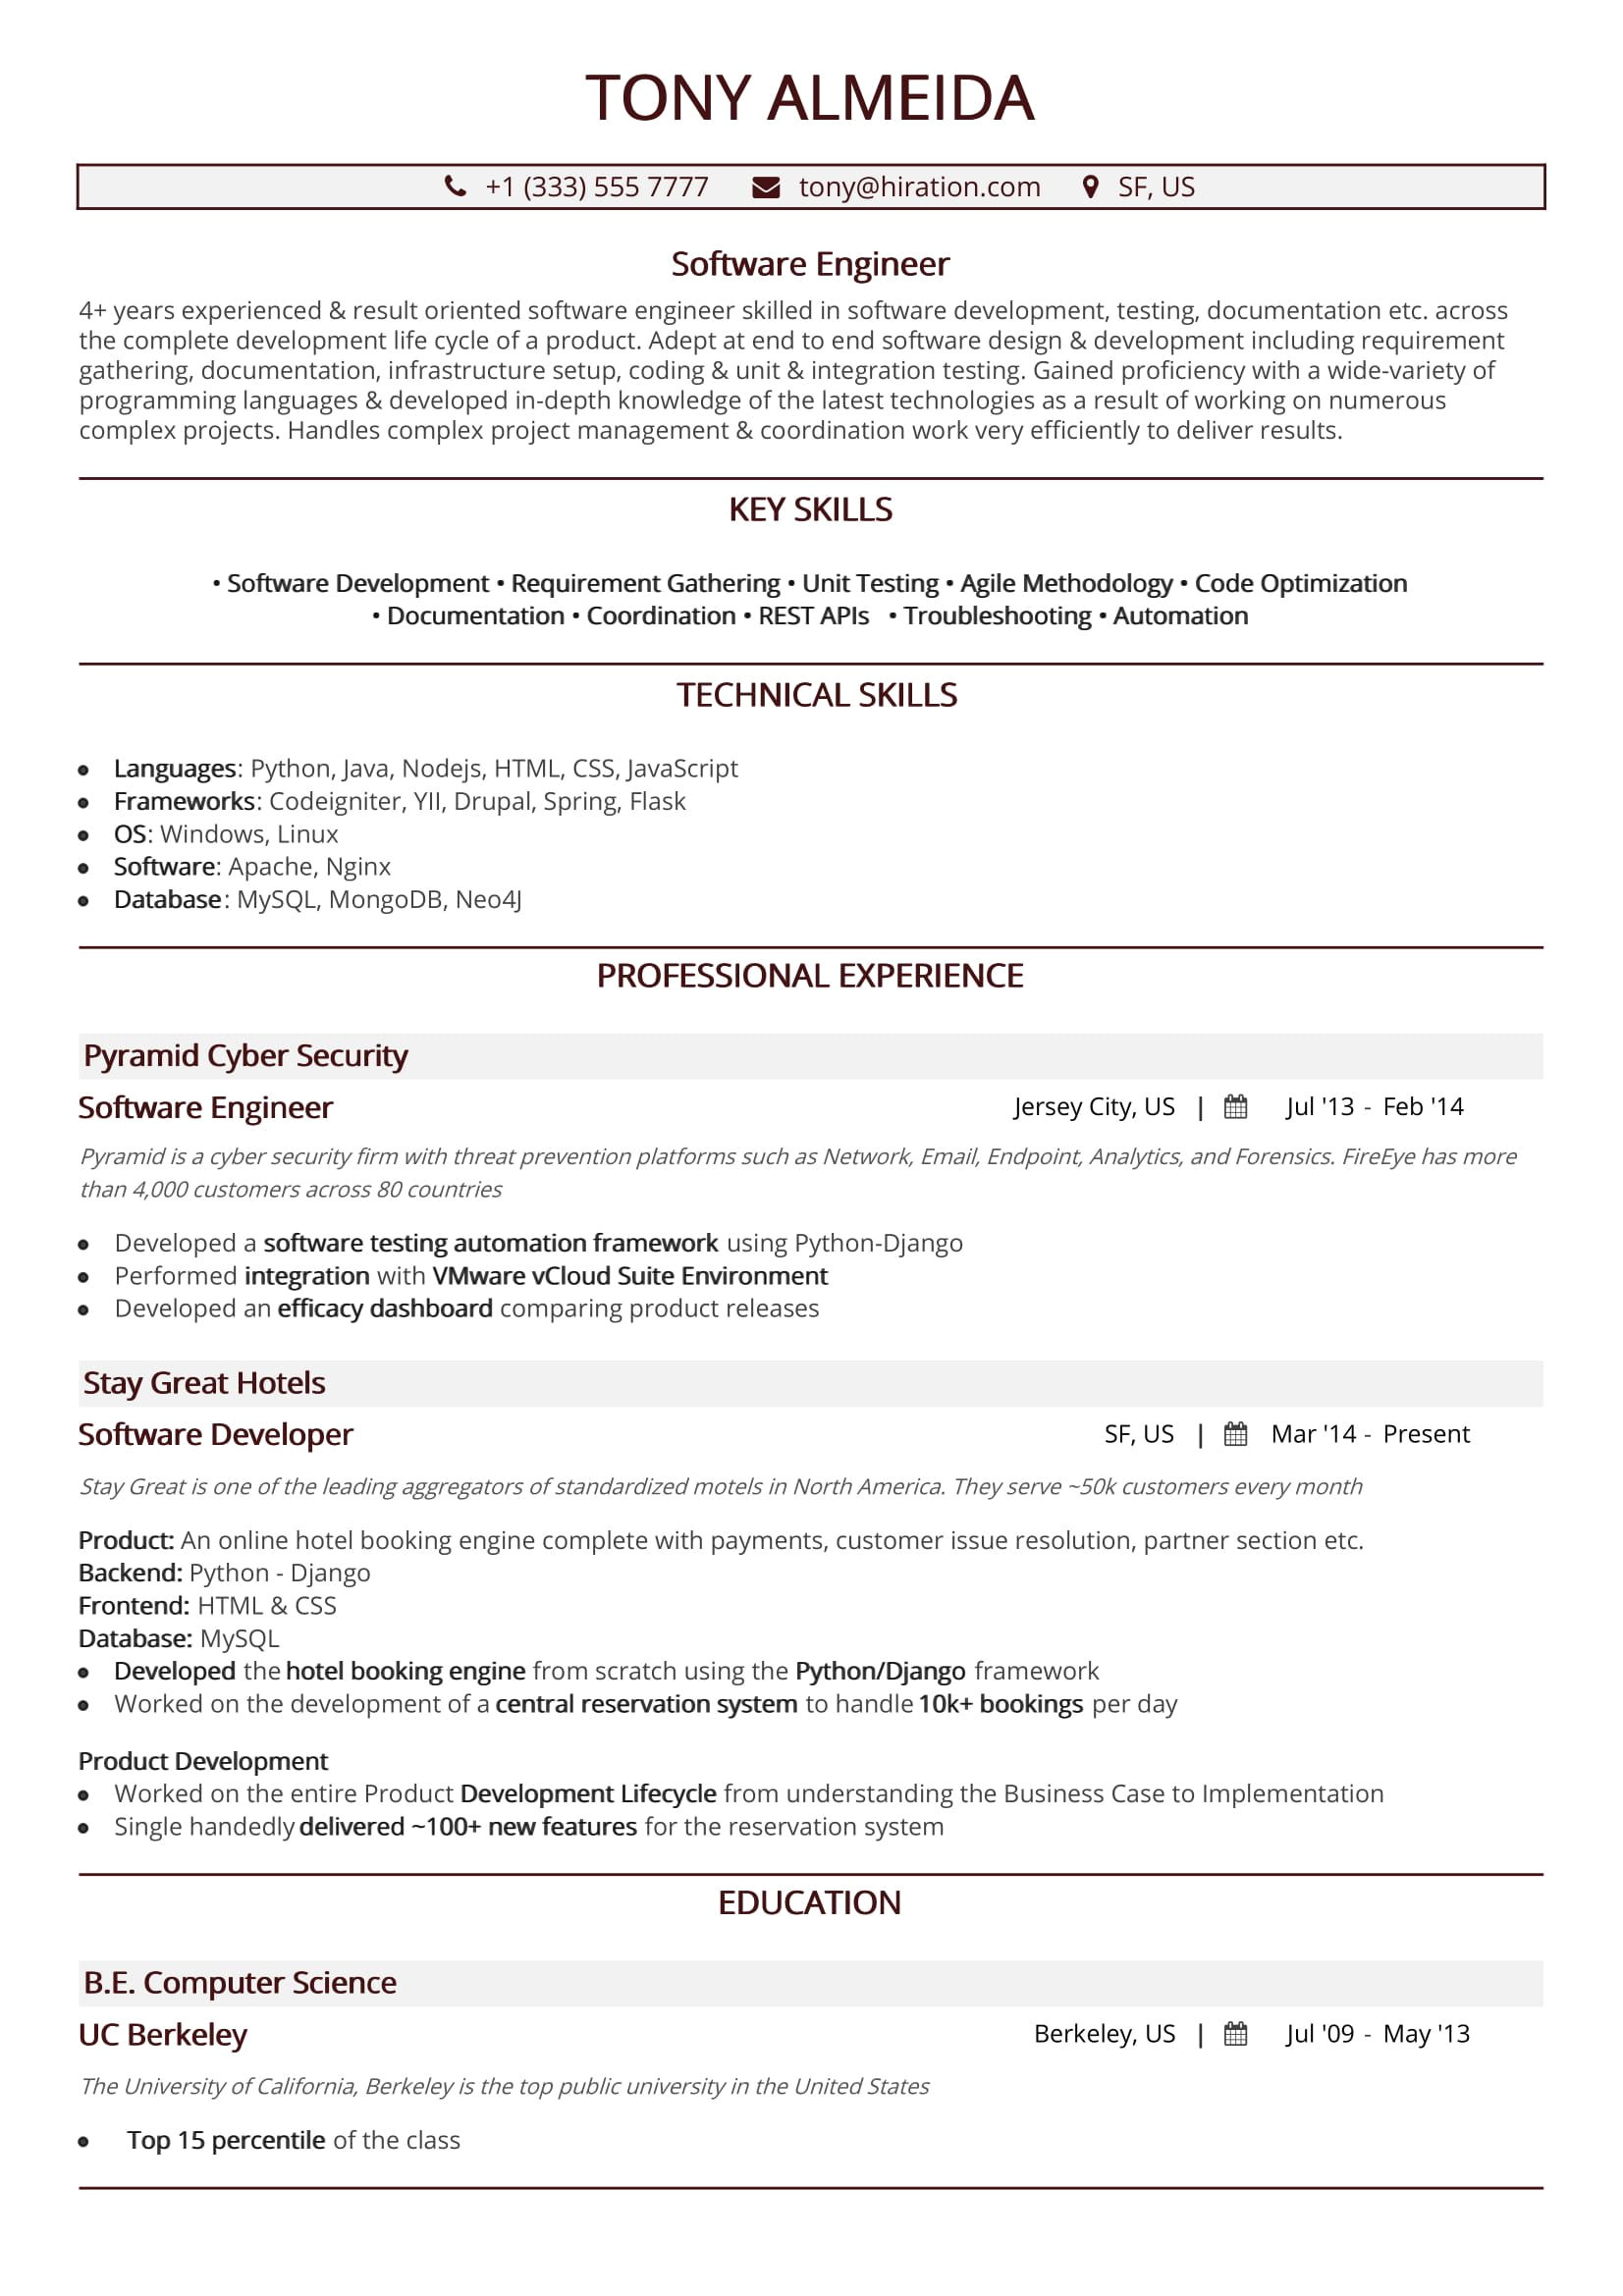 Engineer Resume Profile Examples software Engineer Resume A 10 Step 2019 Guide with 20